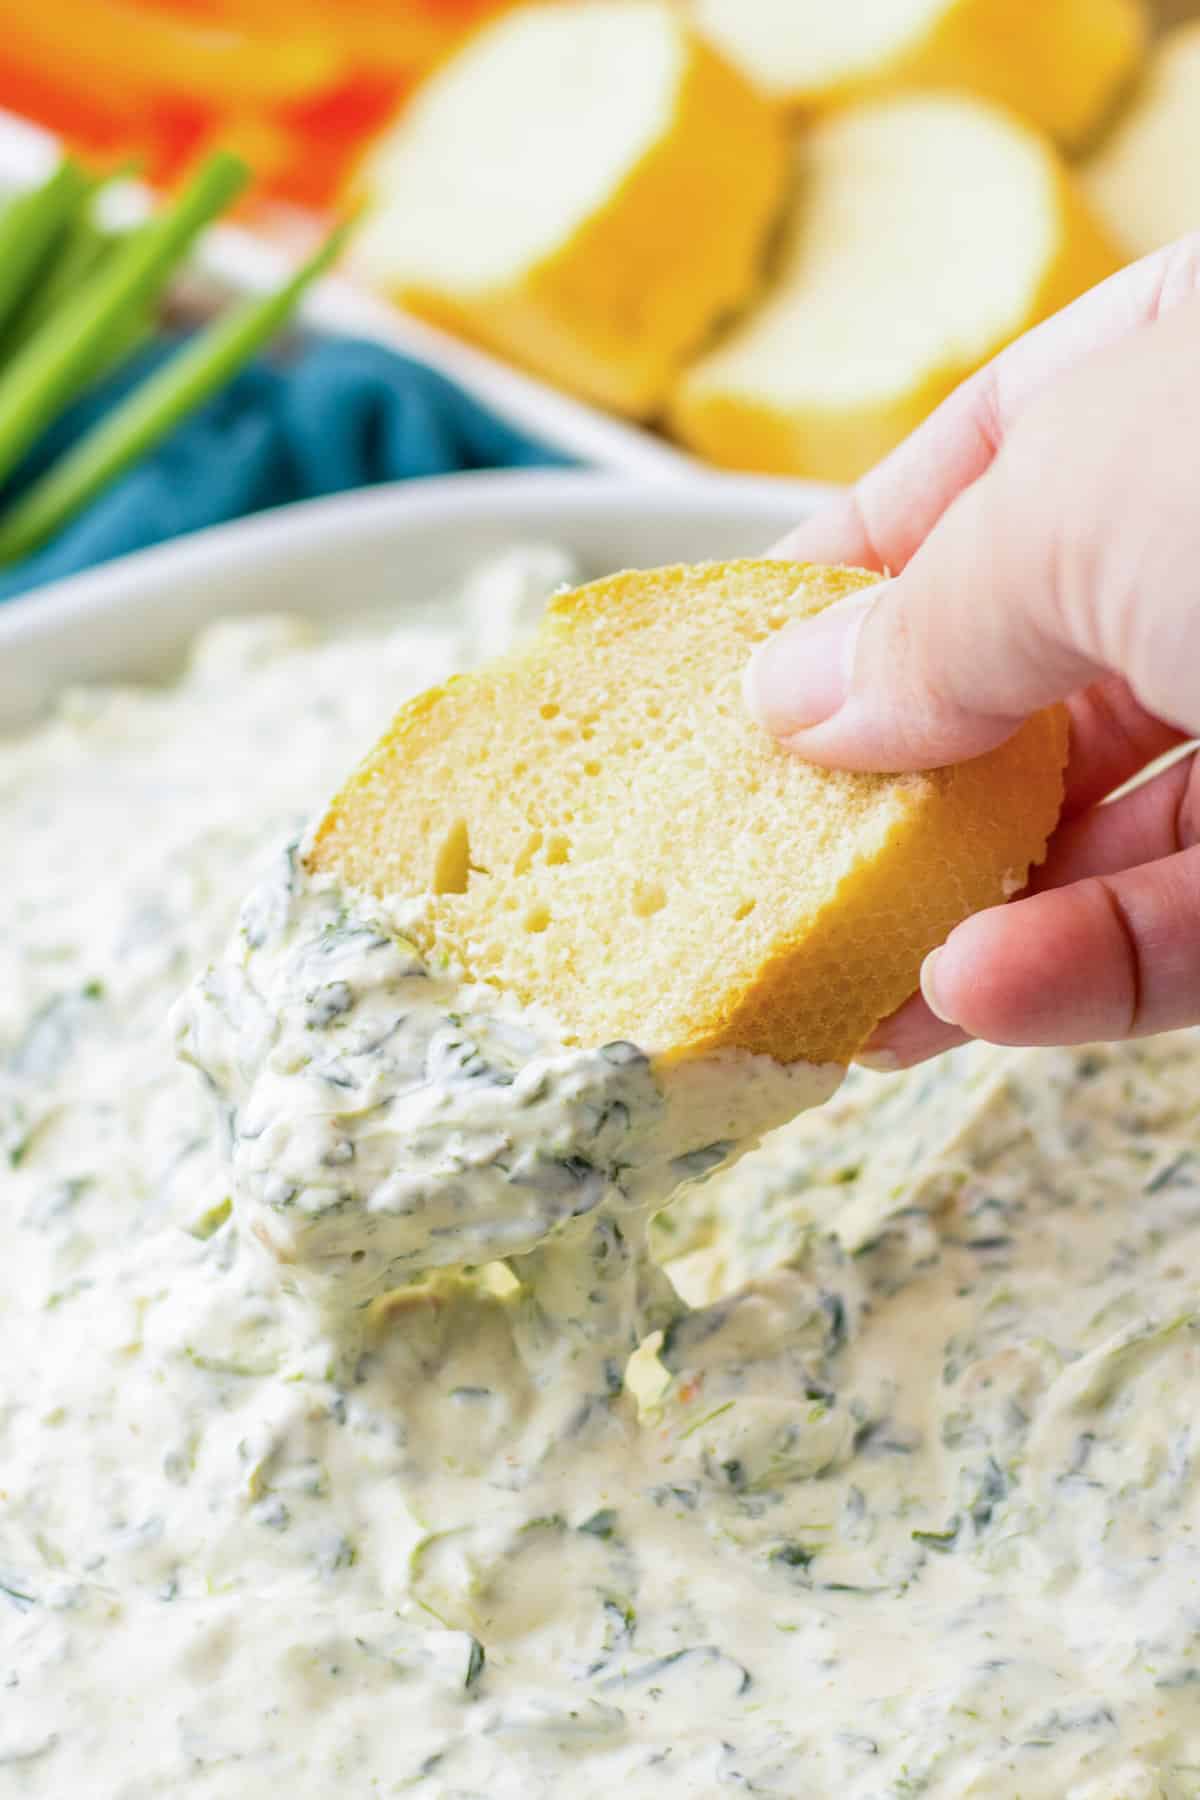 Piece of bread being dipped in cold spinach dip.